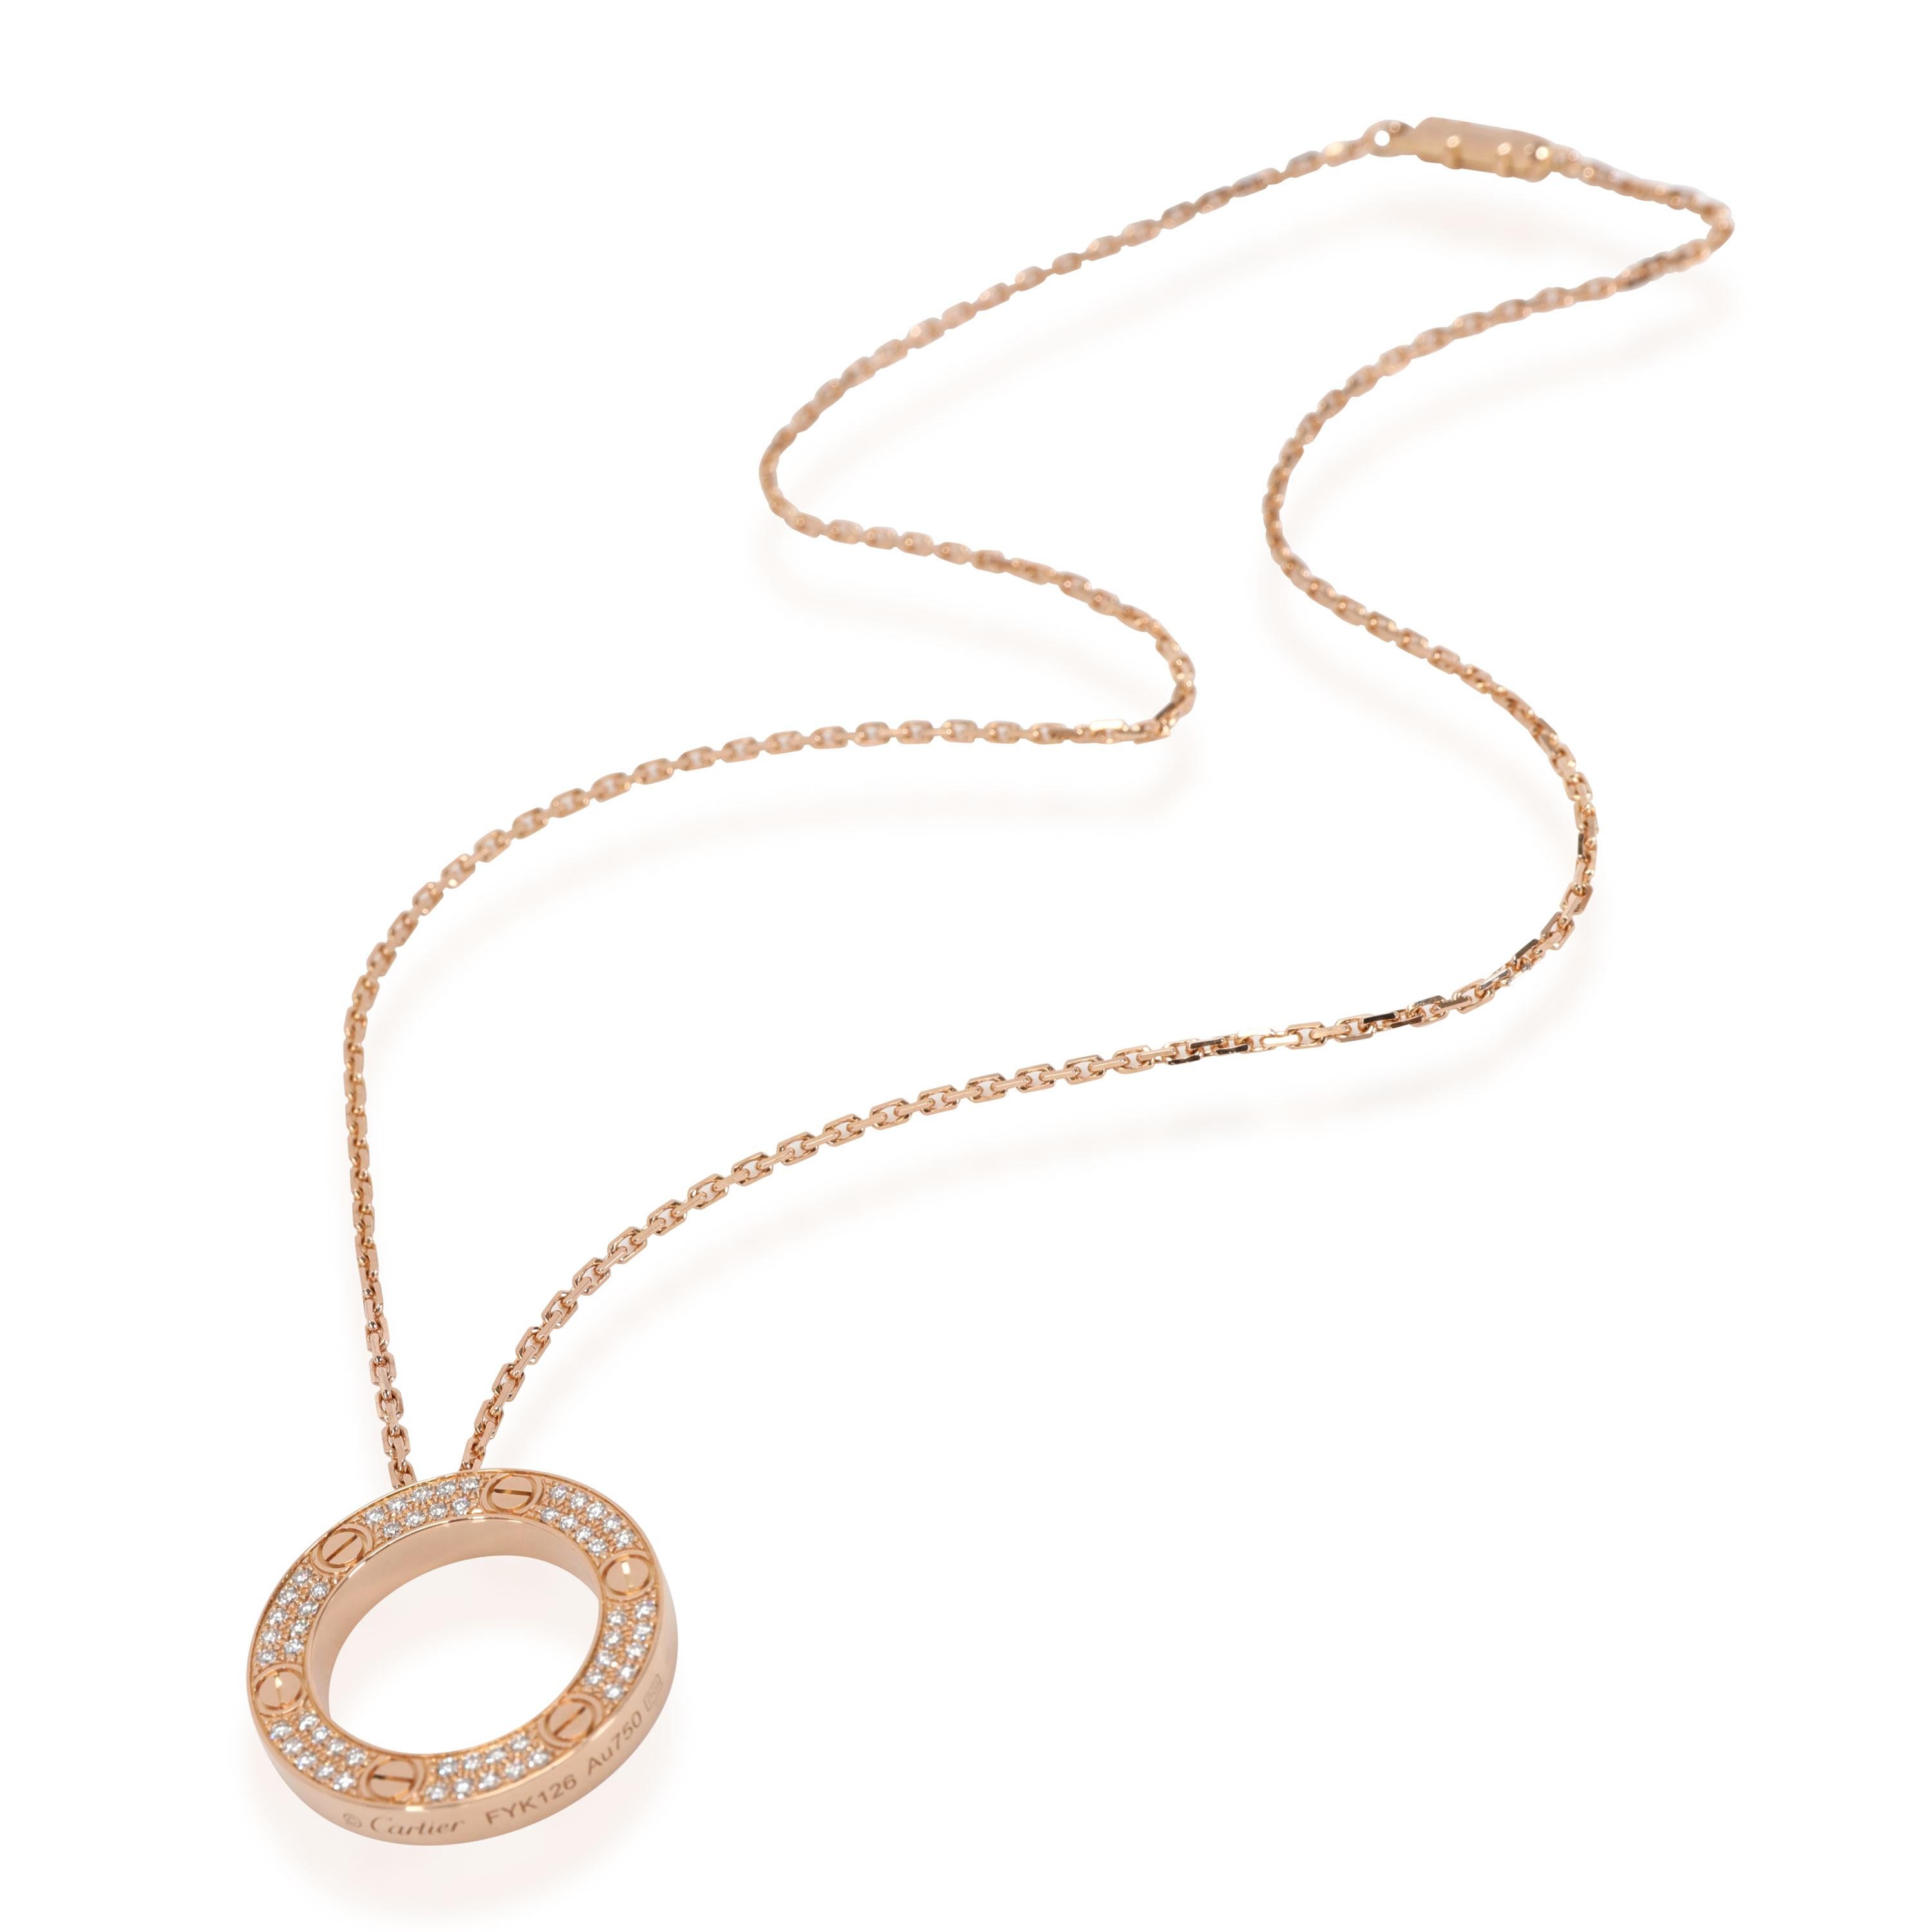 Cartier Love Diamond Necklace in 18k Rose Gold 0.34 CTW

PRIMARY DETAILS
SKU: 115144
Listing Title: Cartier Love Diamond Necklace in 18k Rose Gold 0.34 CTW
Condition Description: Retails for 8200 USD. In excellent condition and recently polished.